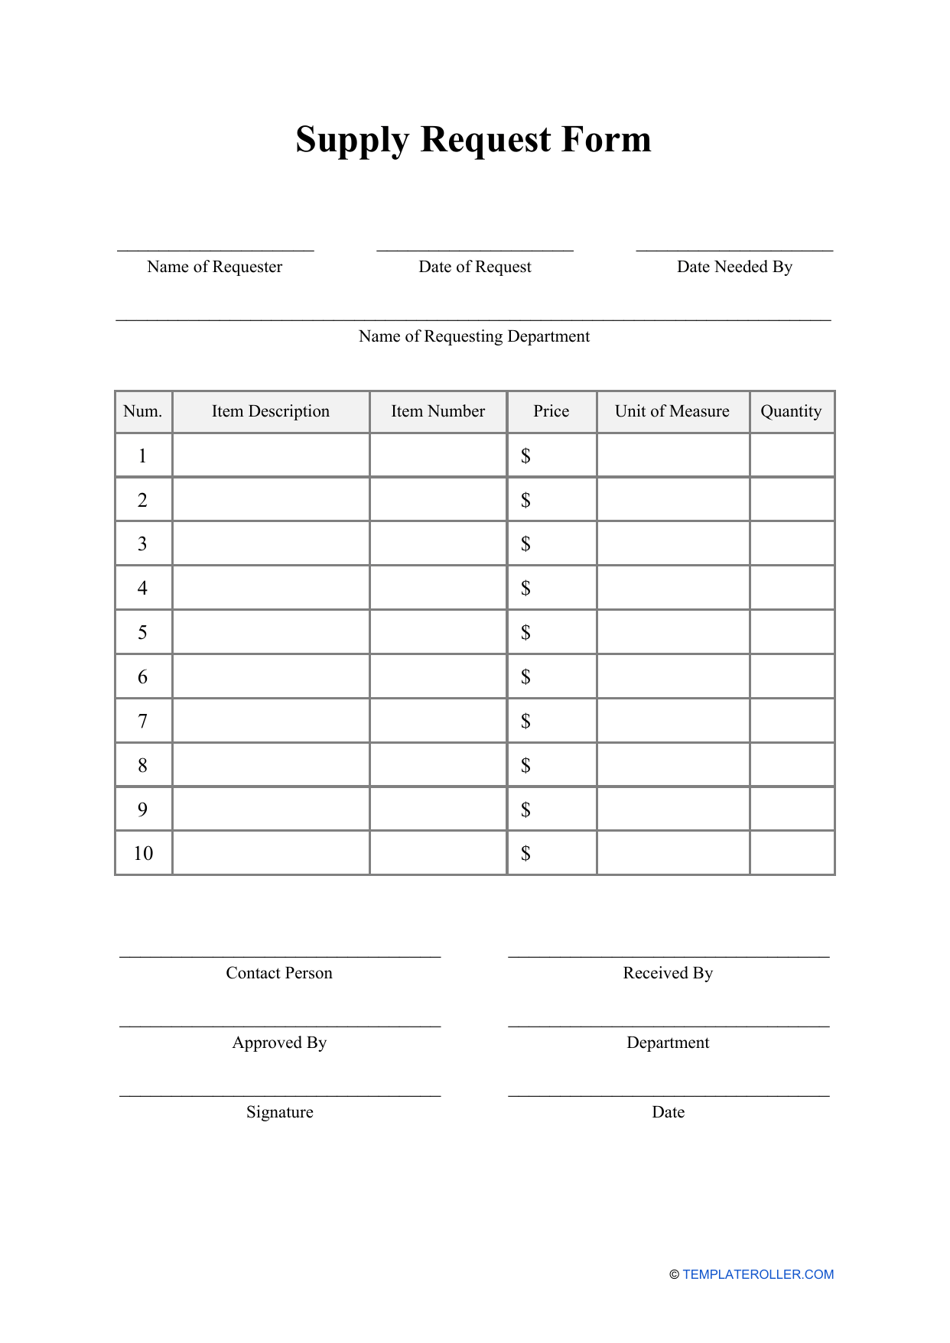 Supply Request Form Fill Out, Sign Online and Download PDF